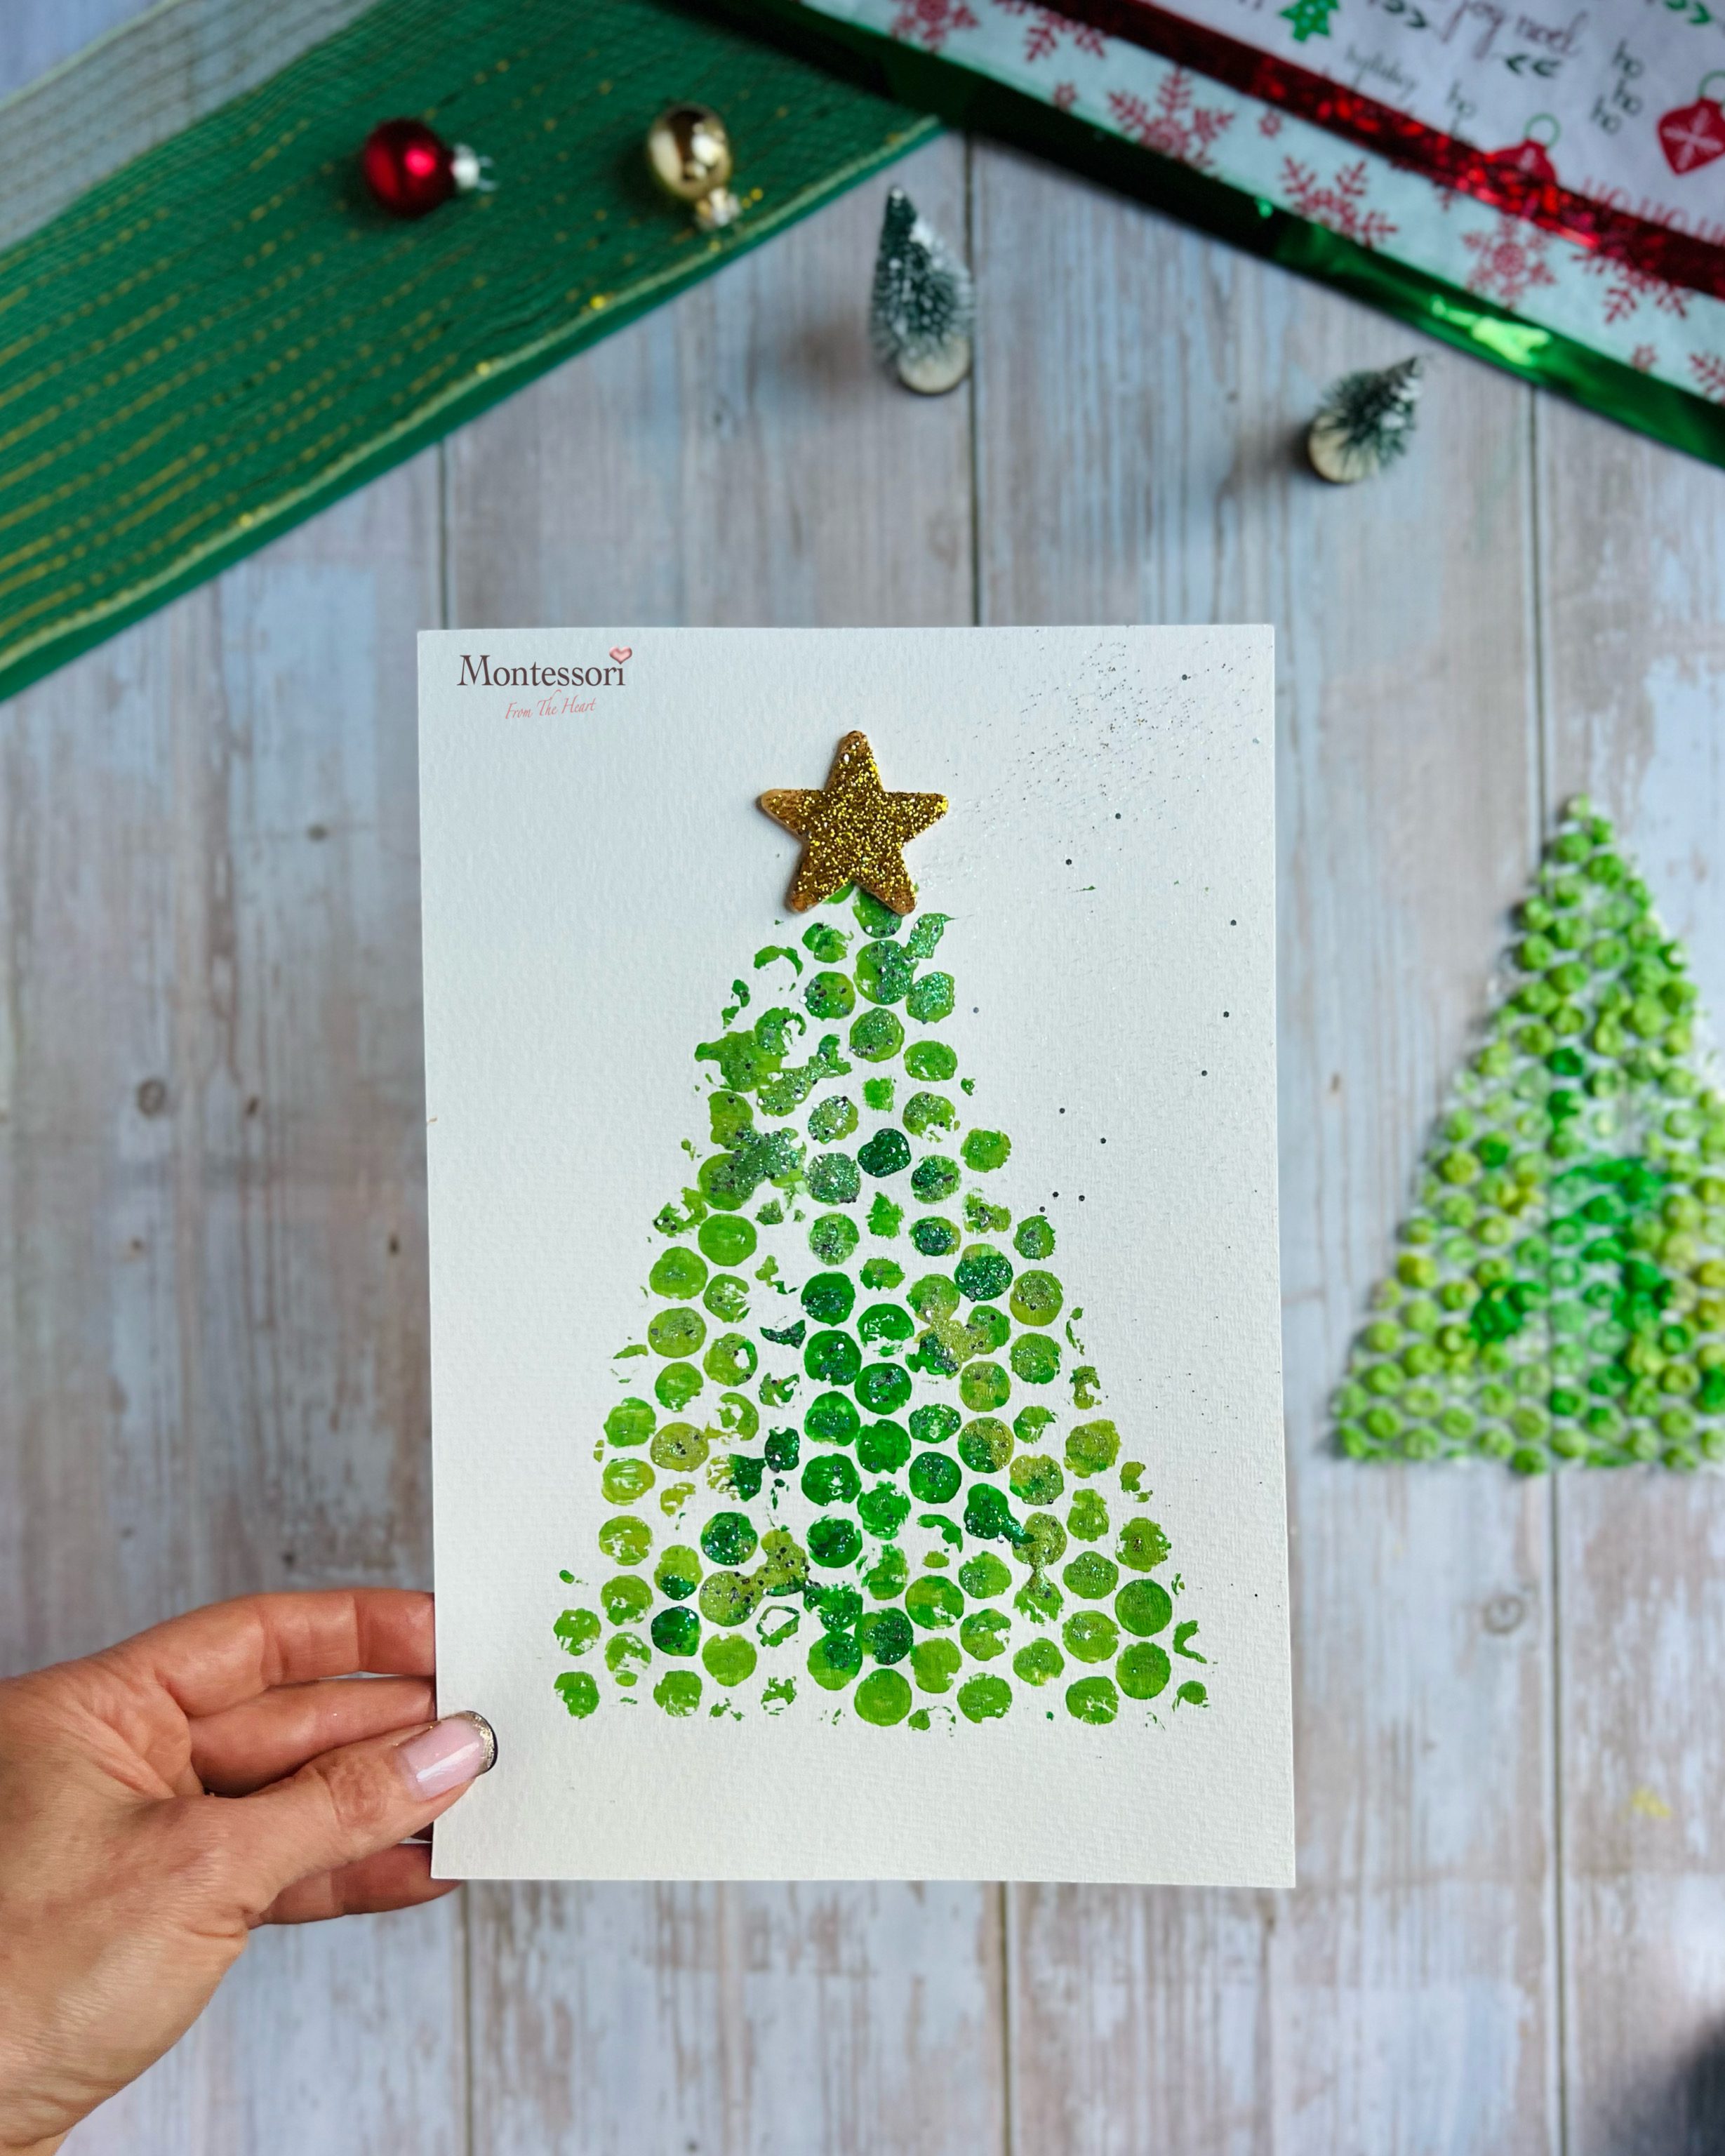 https://montessorifromtheheart.com/wp-content/uploads/2022/11/Christmas-Tree-Printing-Kids-Holiday-Craft-Card.jpg